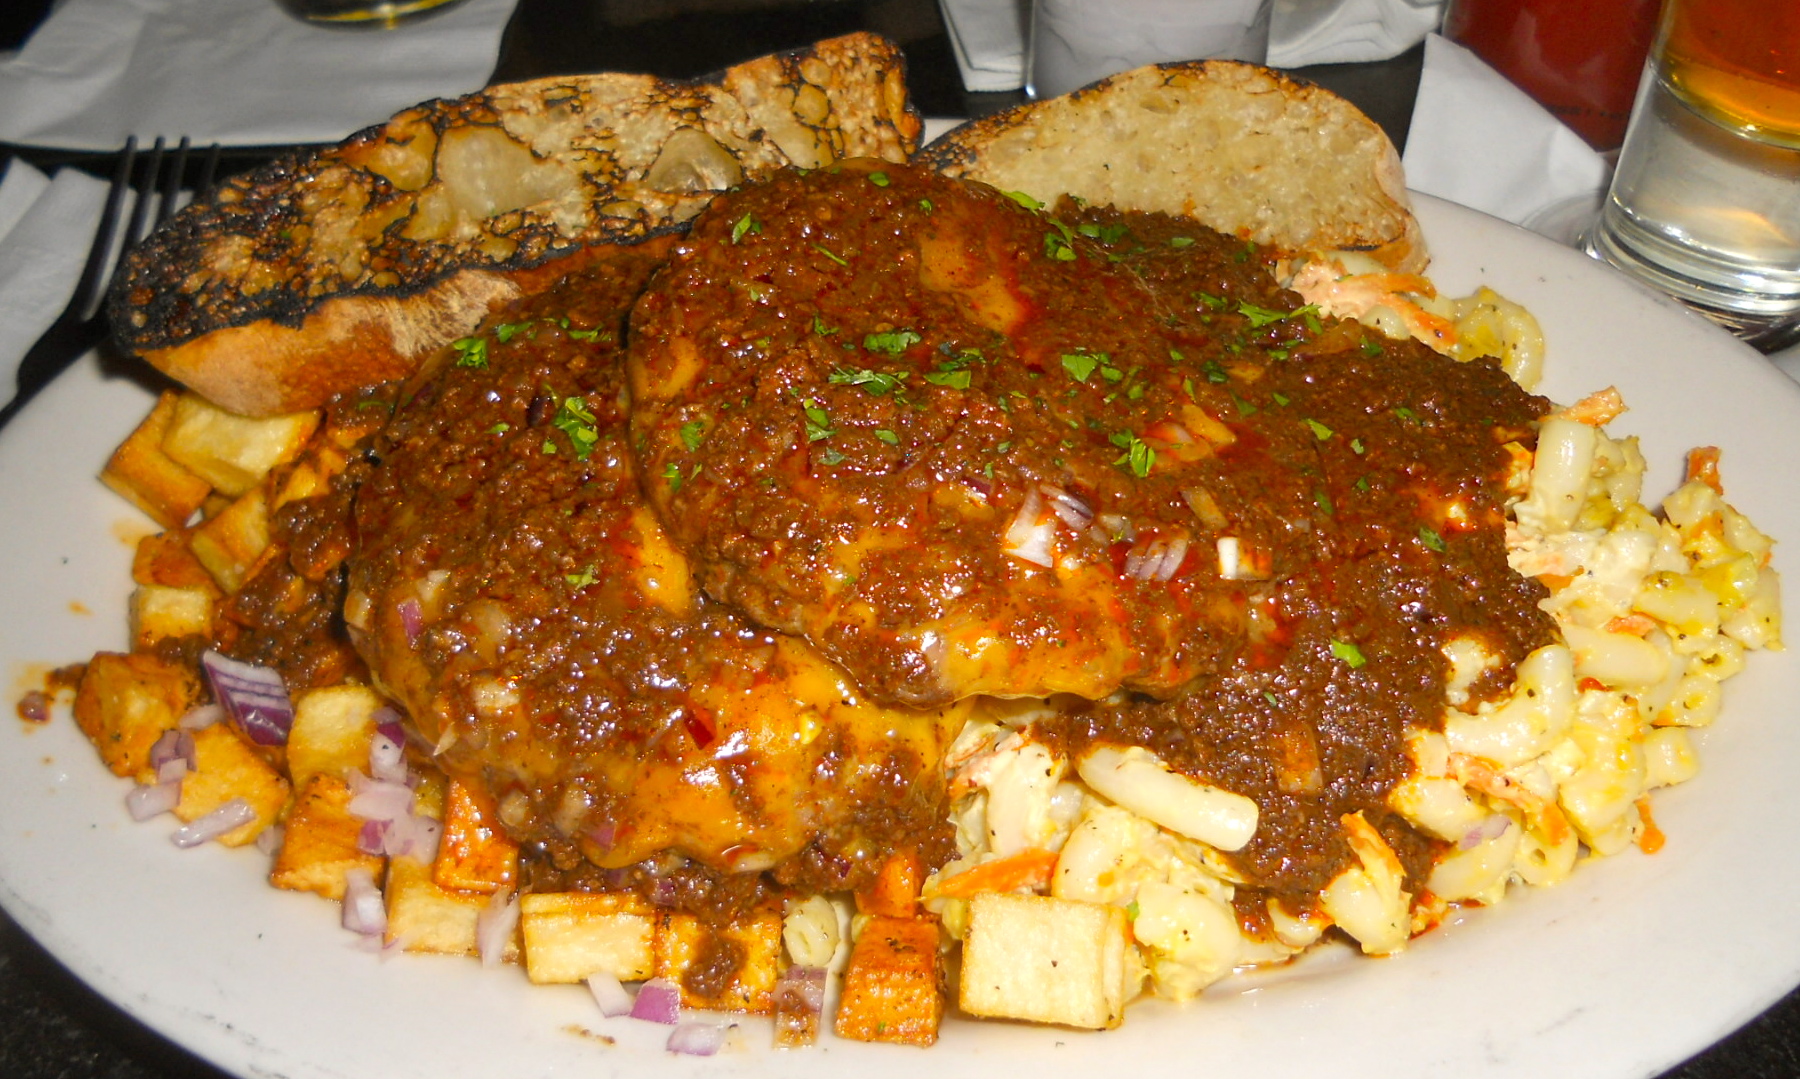 Rochester Garbage Plate and Iraqi Cuisine in NYC